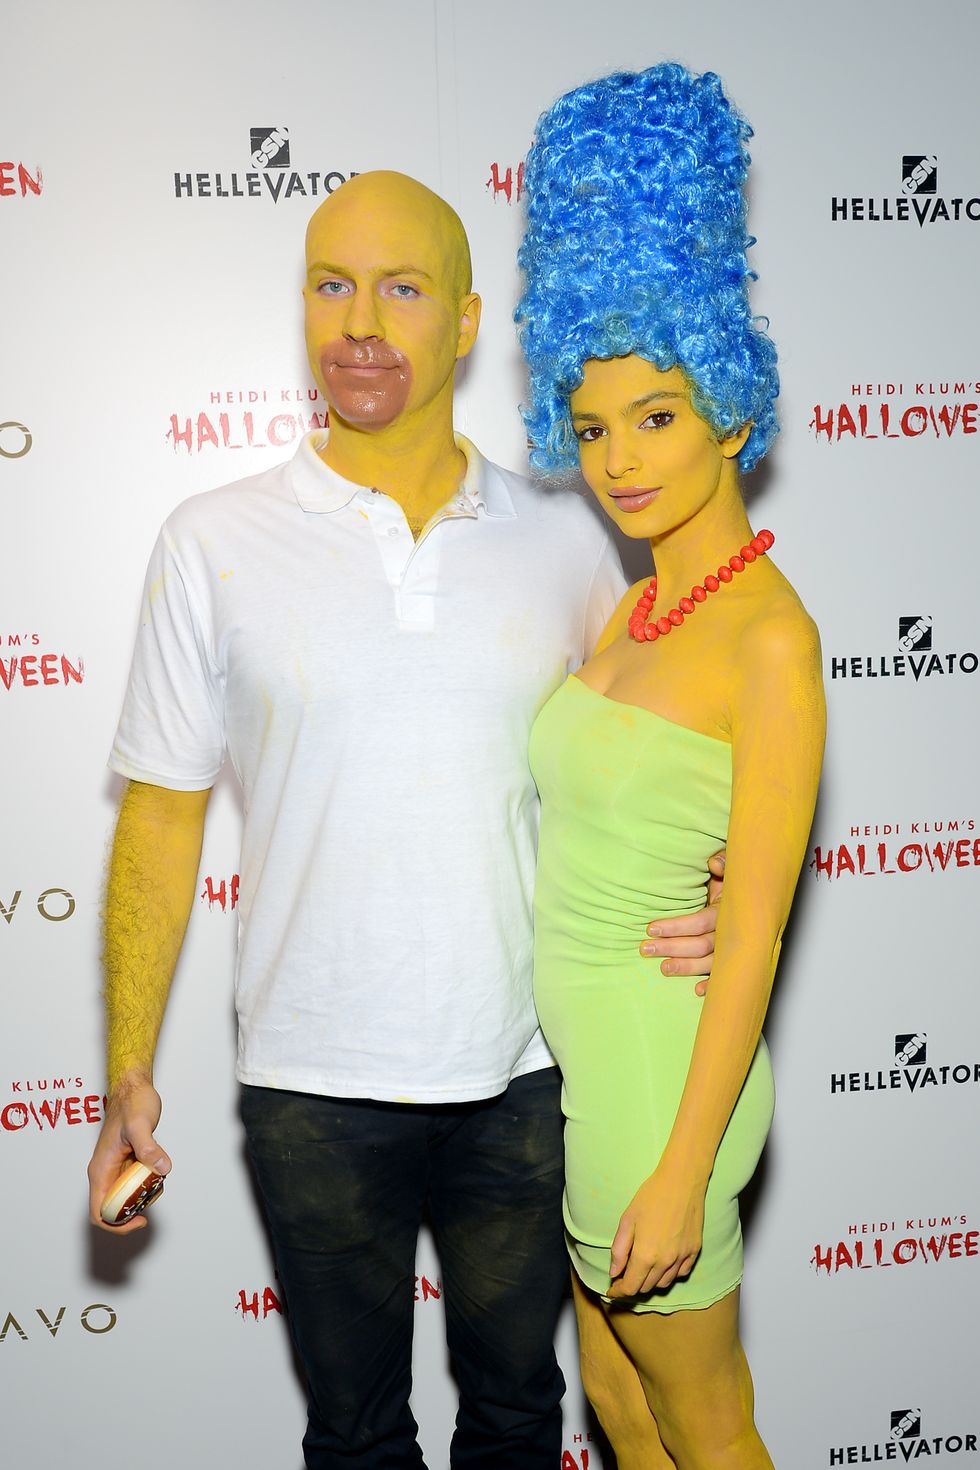 new york, ny october 31 jeff magid and emily ratajkowski attend the heidi klum halloween party on october 31, 2015 in new york city photo by andrew tothwireimage